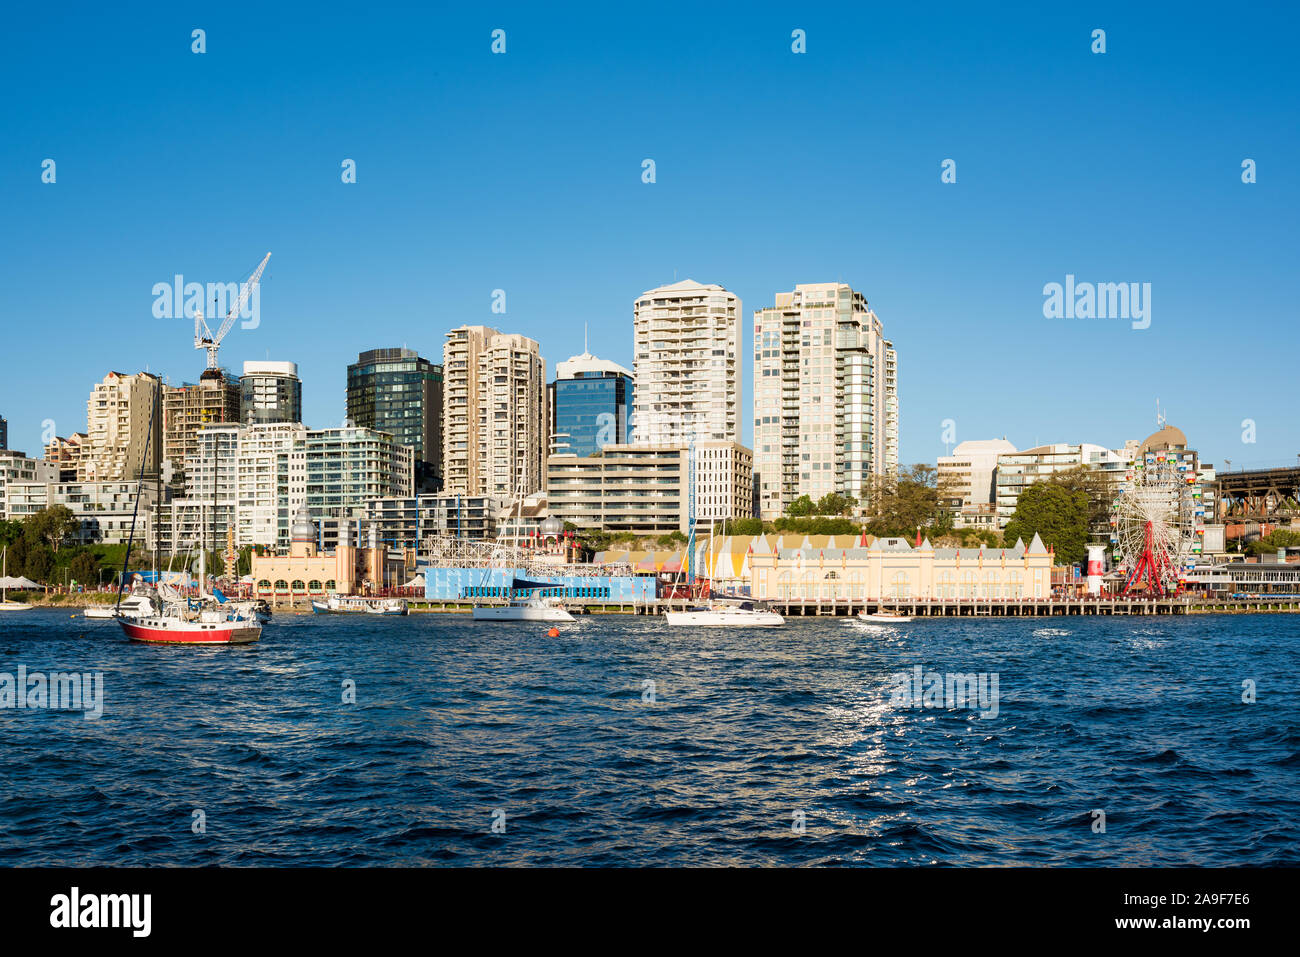 Milsons point and Lavender bay with yachts. Sydney, Australia Stock Photo